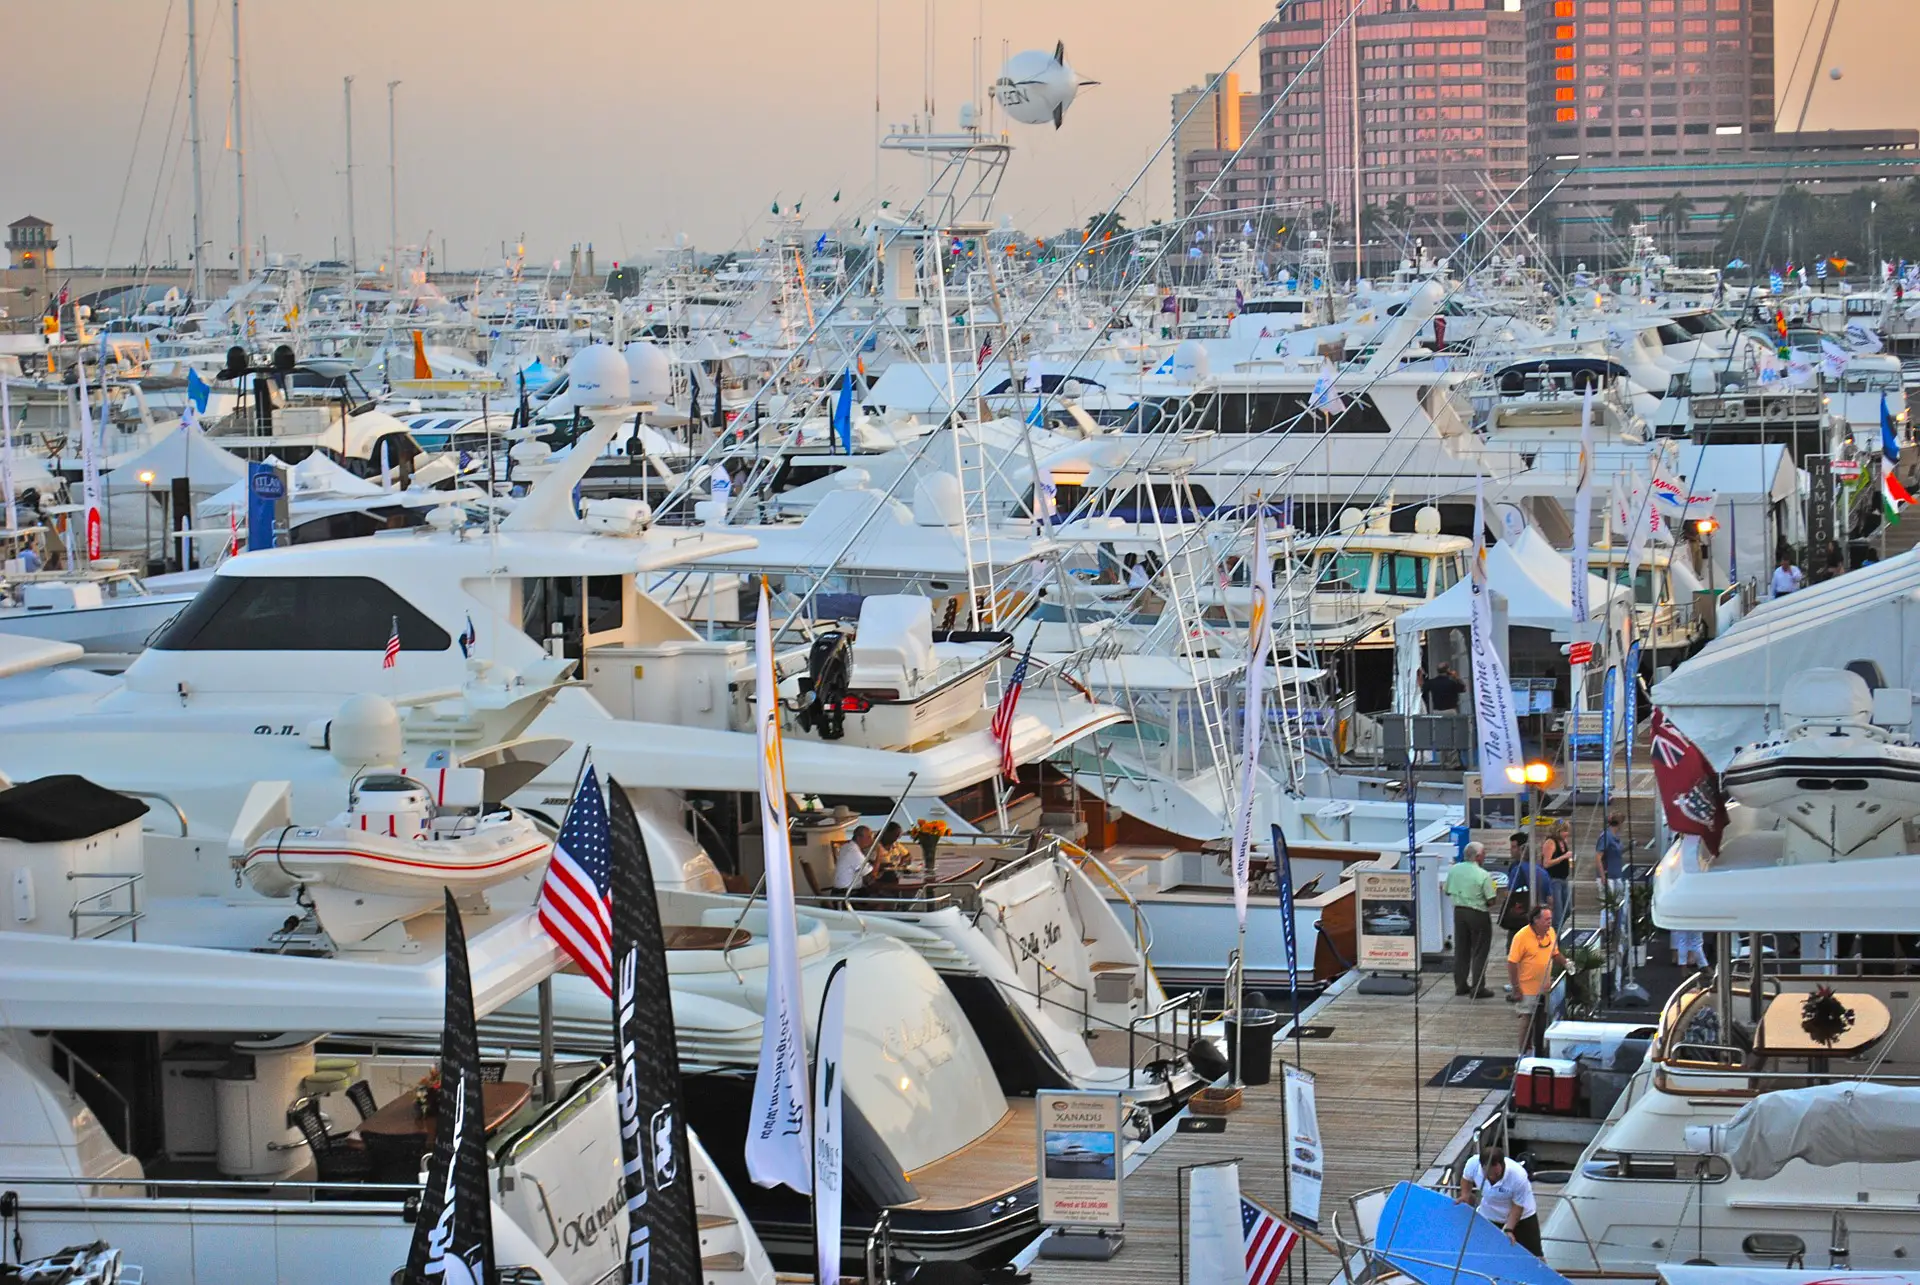 Upcoming Florida Boat Shows You Should Attend